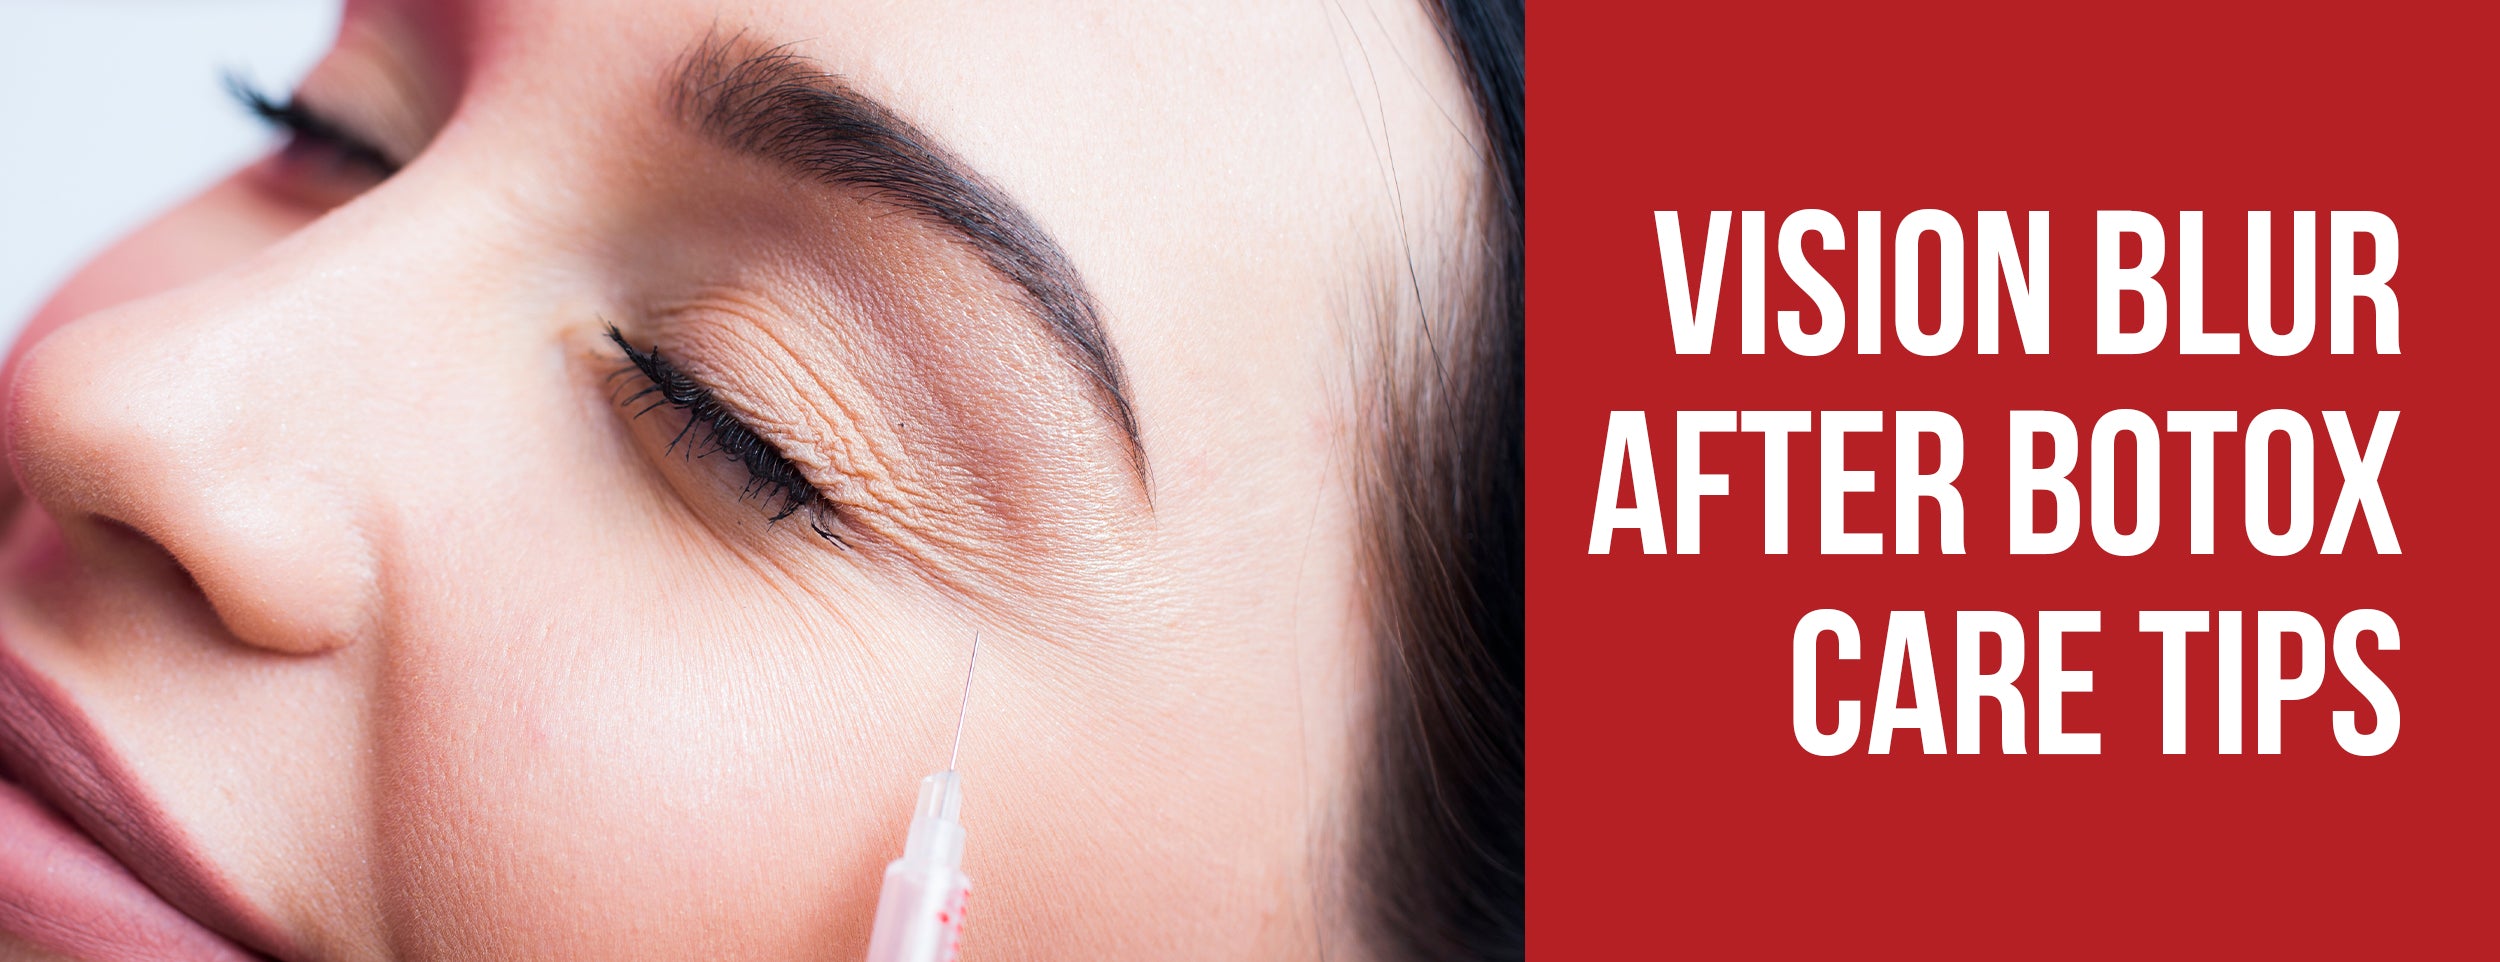 Vision Blur After Botox: Care Tips